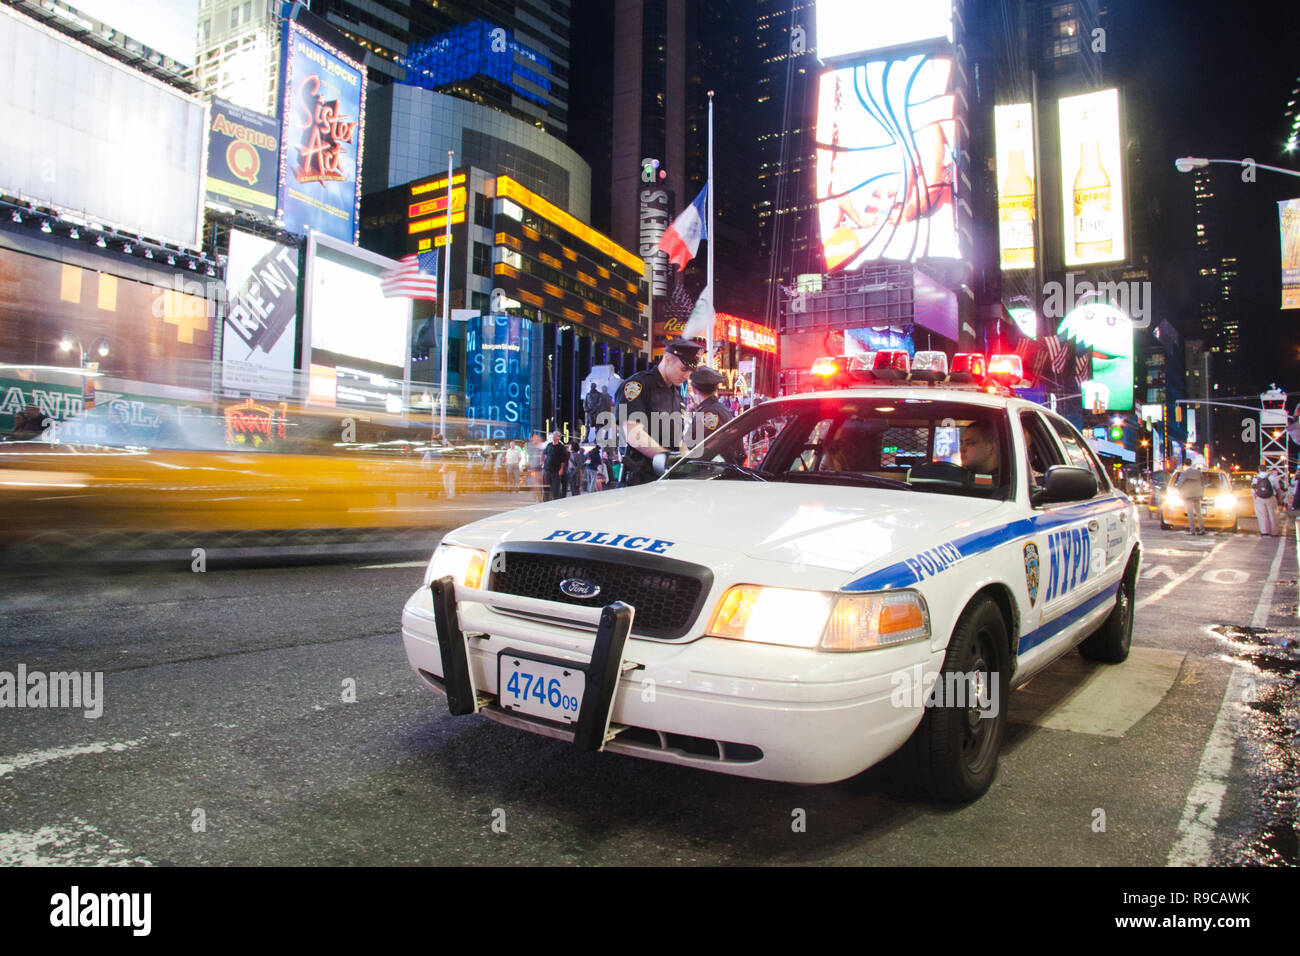 NYPD police car in Times Square, New York City Stock Photo